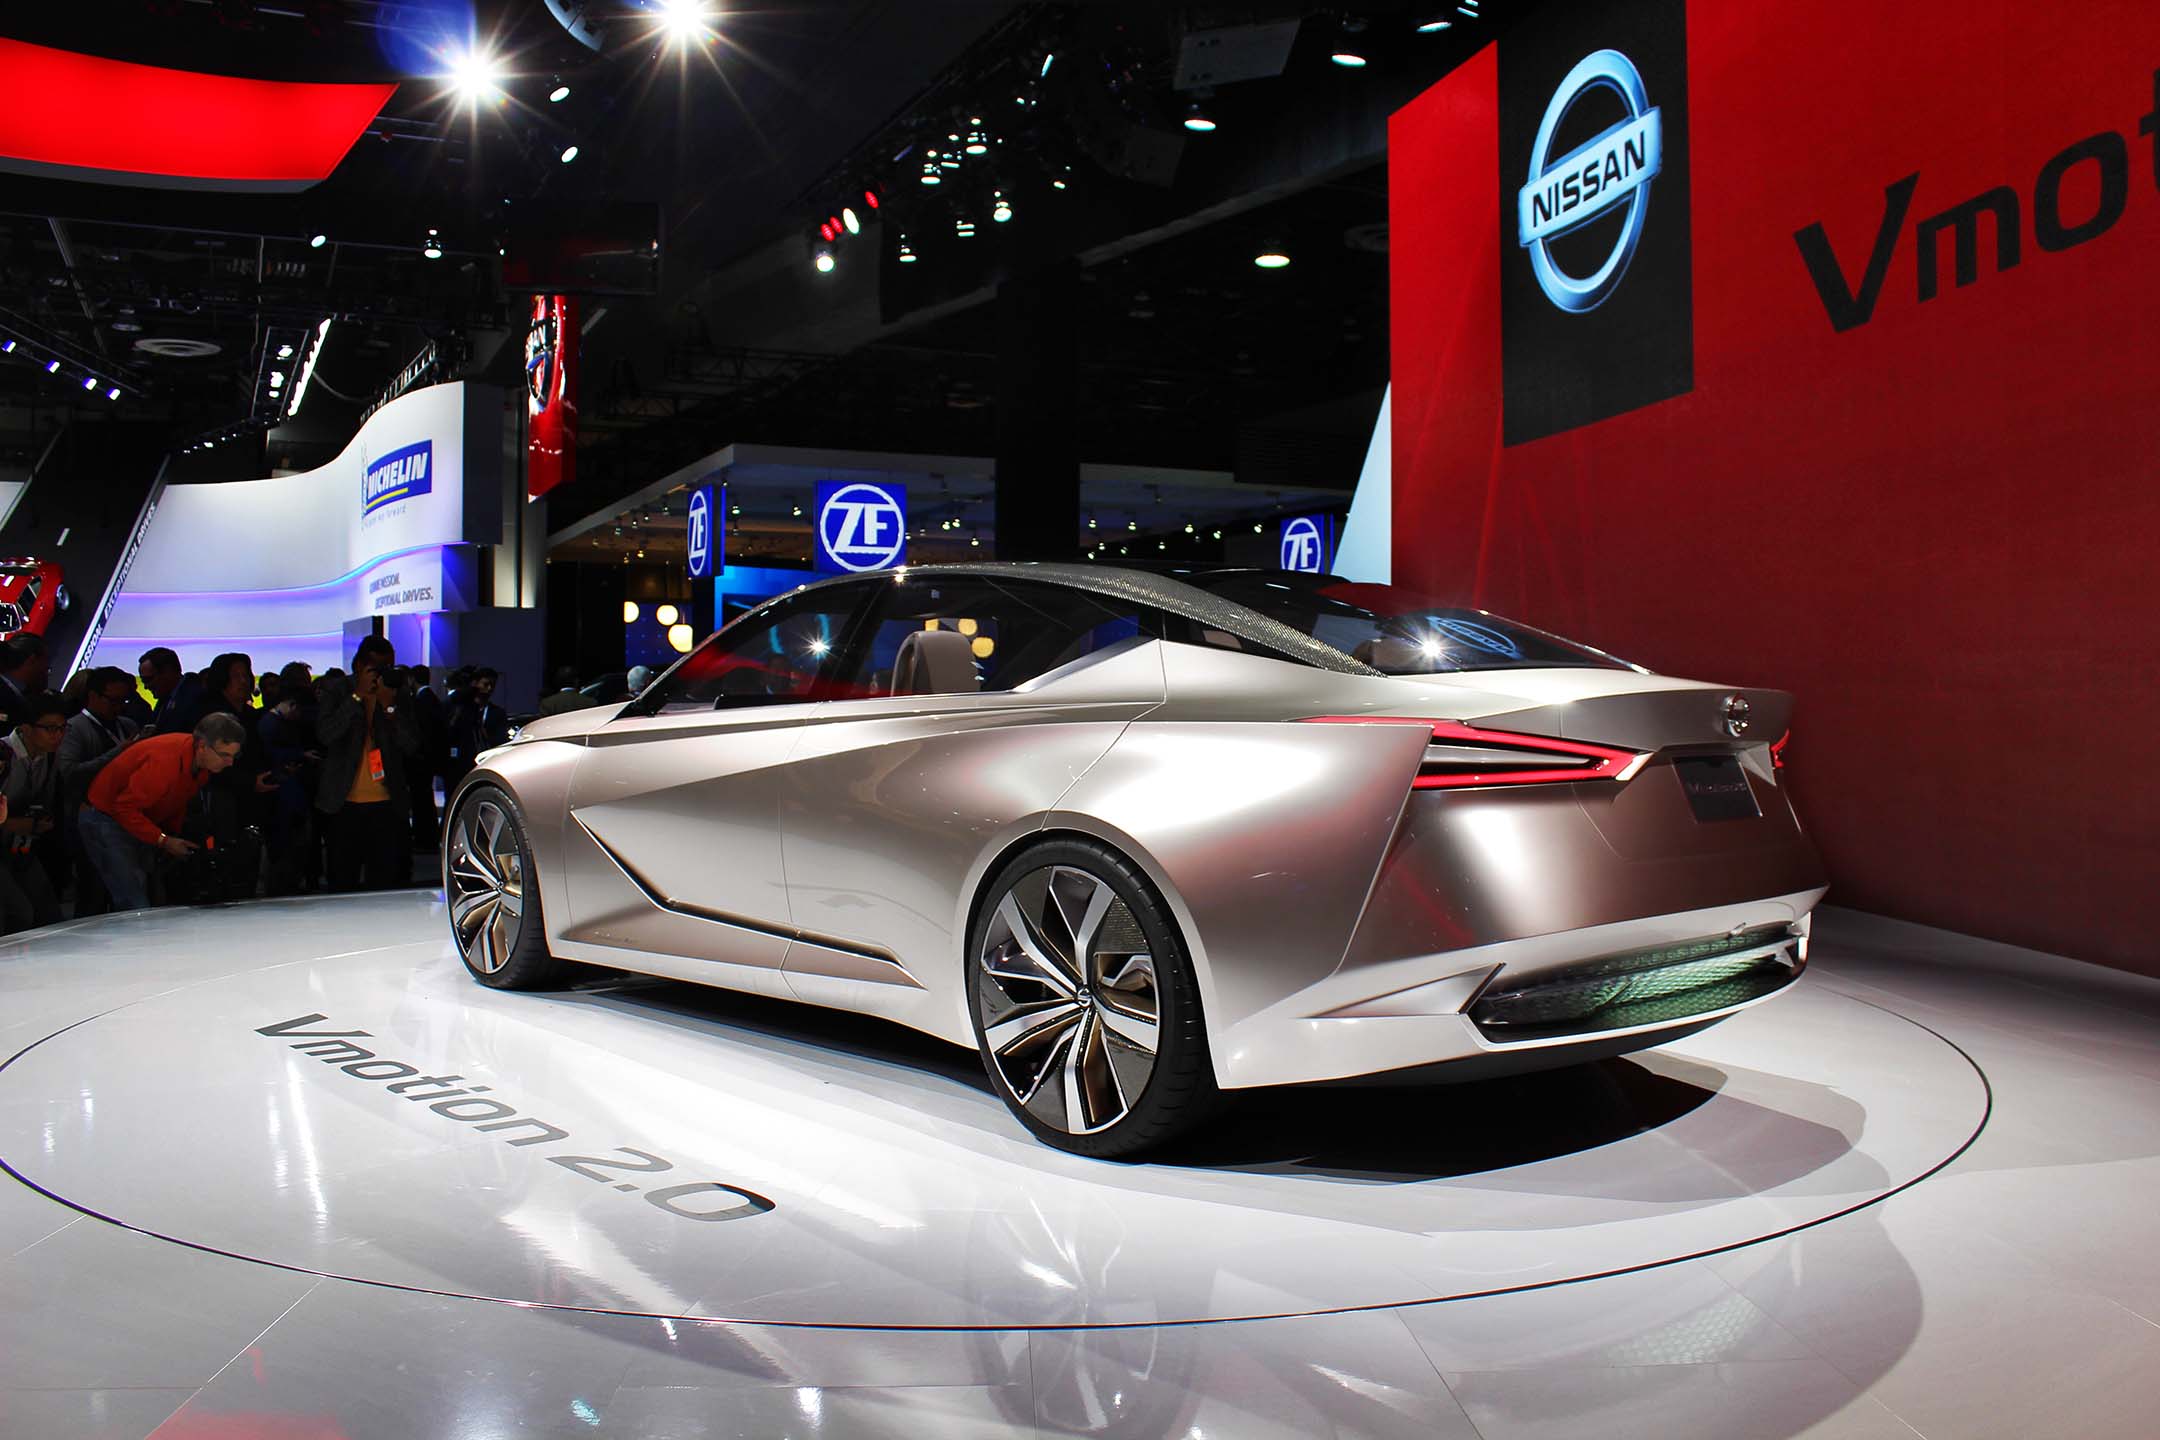 SG: Now here’s a Nissan that has the potential to dazzle. It is only a concept, however, and whatever it gets turned into would most likely end up with a watered-down version of this design. But the suicide doors and aggressive, chiselled aesthetic are a great foundation.